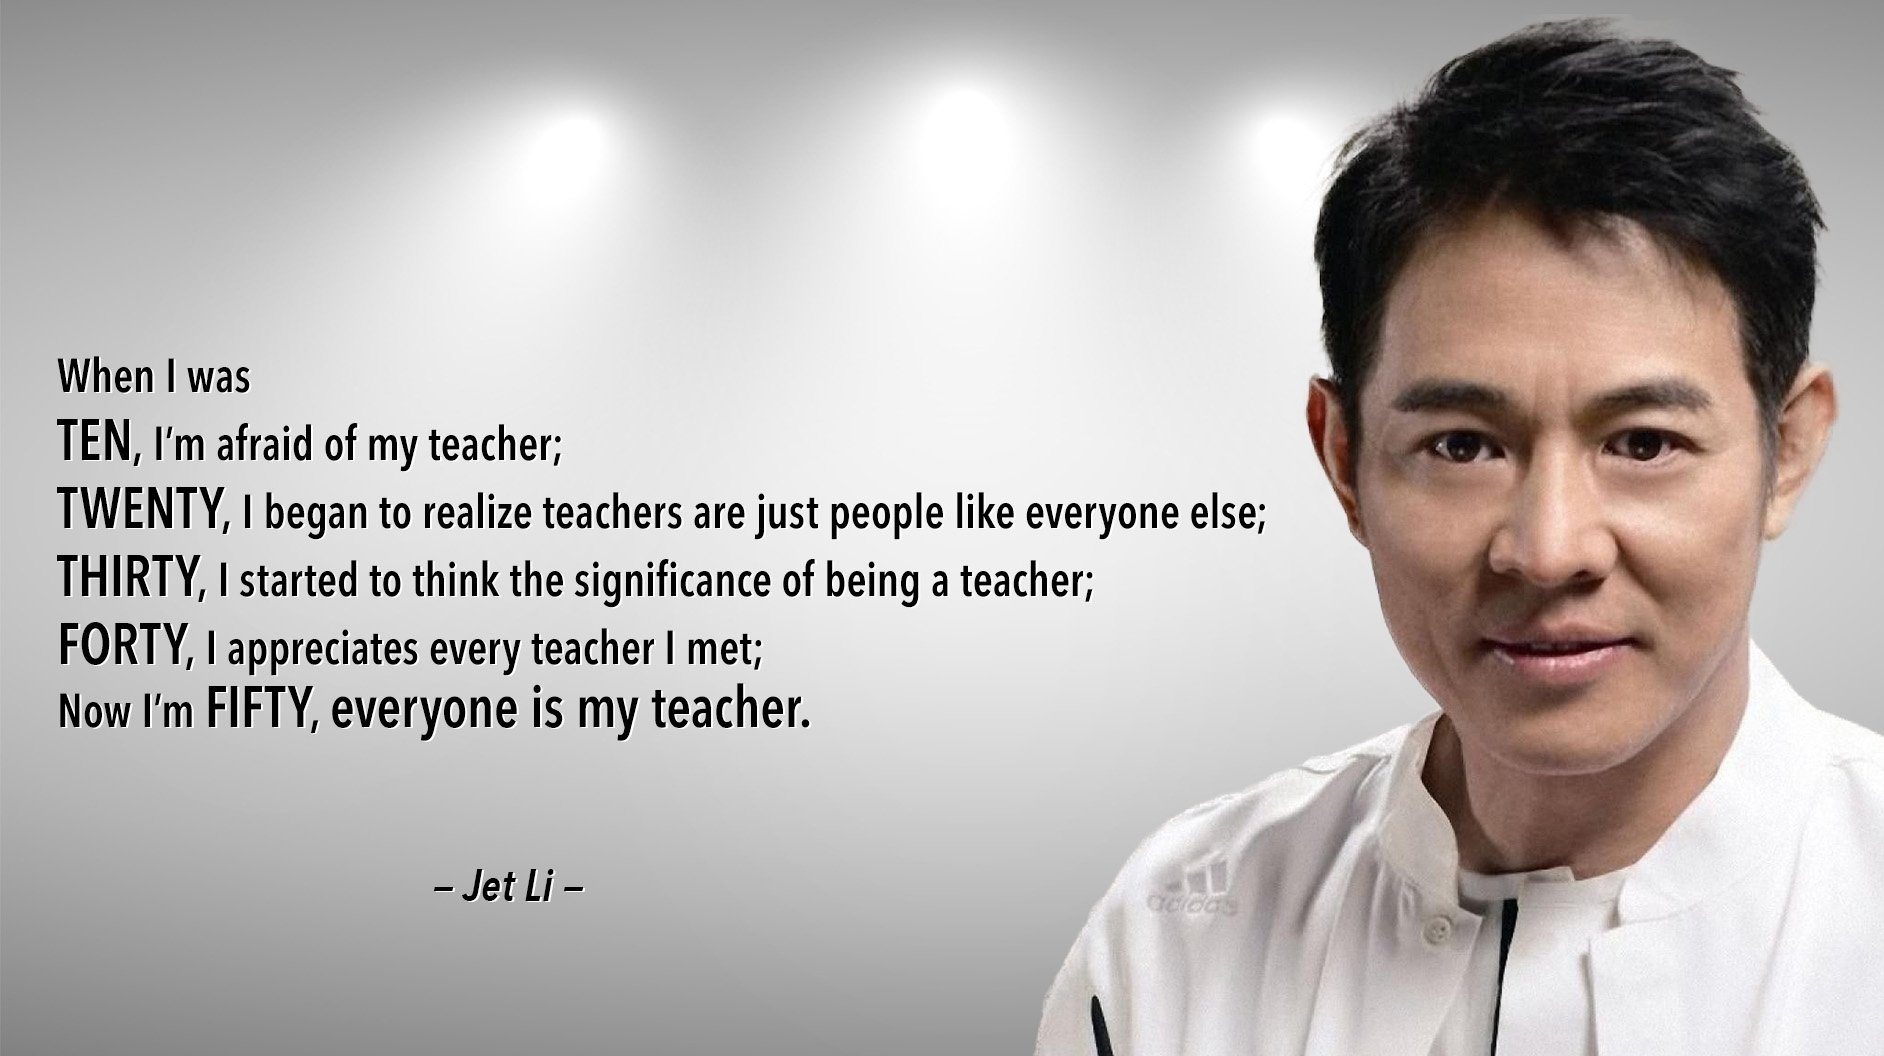 Jet Li 李连杰 on X: Thanks for all the teachers that appeared in